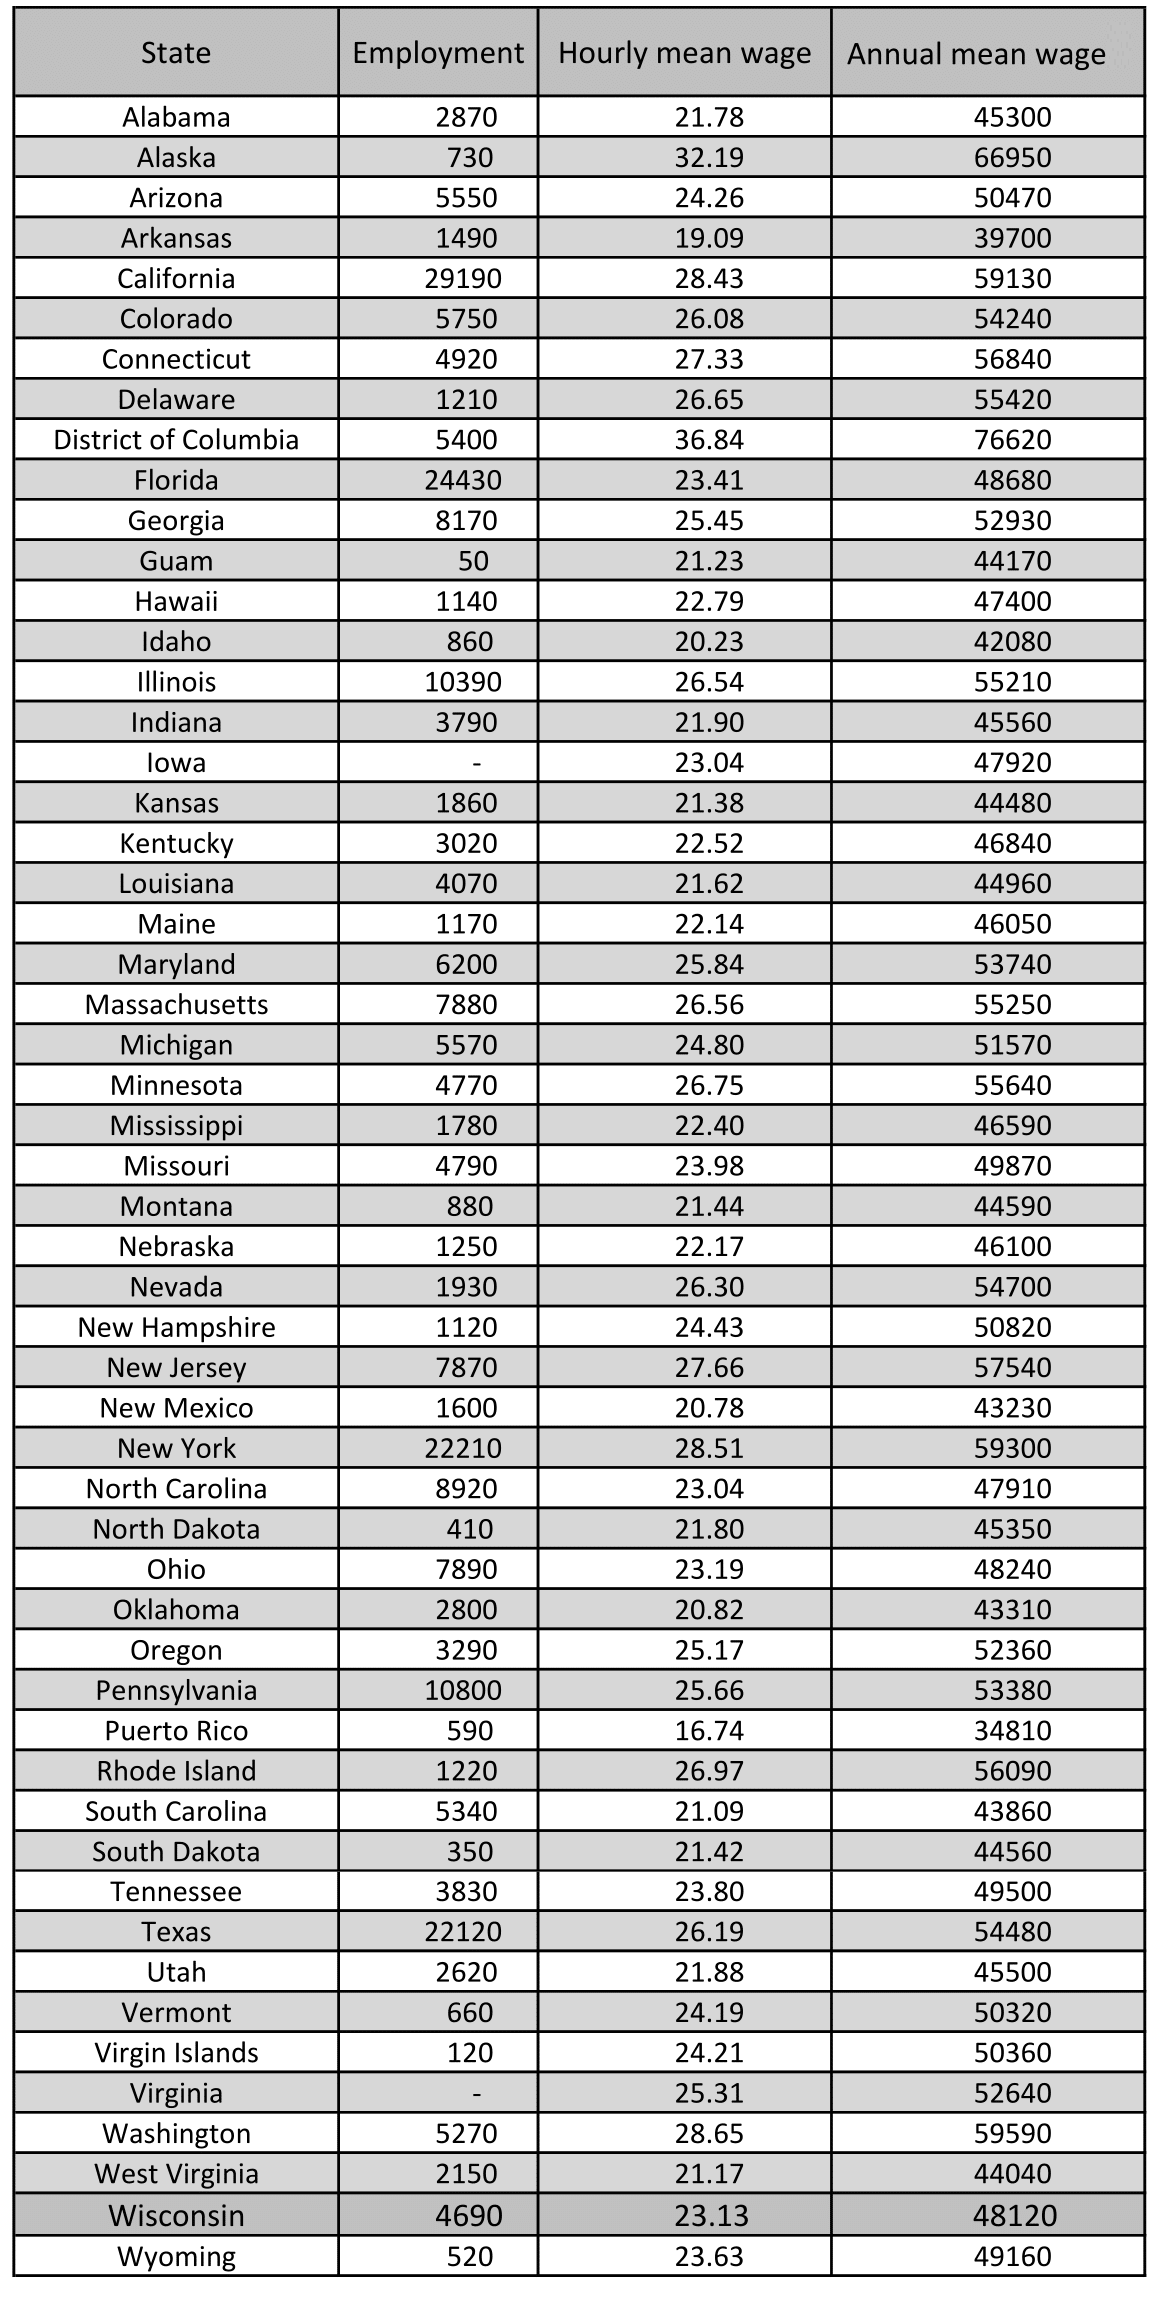 Paralegal average hourly wage & salary for all 50 states — D.C. tops the list at $76k